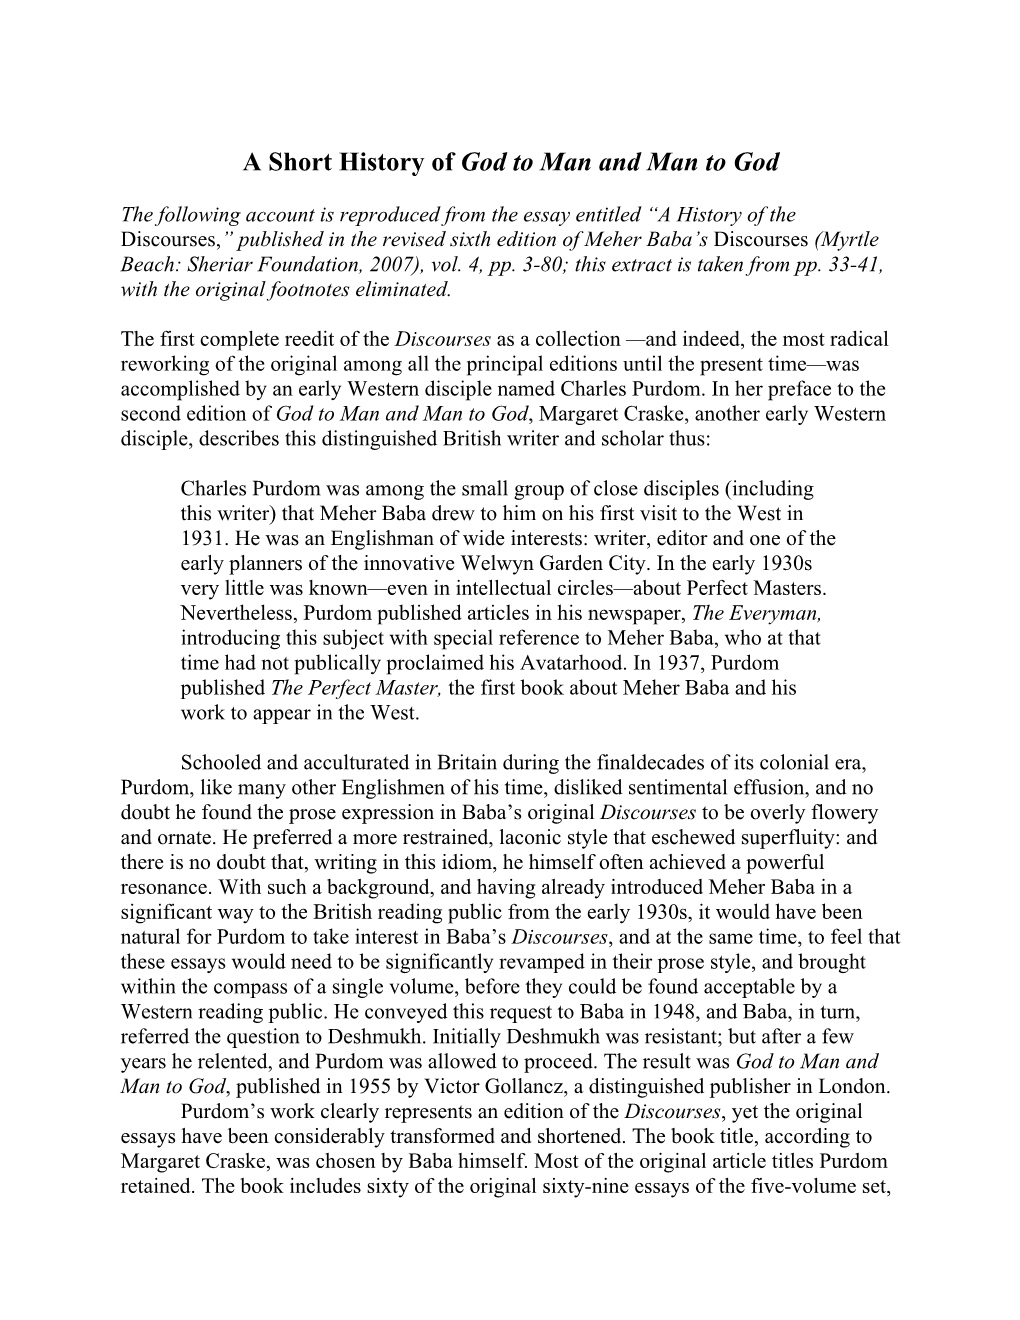 A Short History of God to Man and Man to God